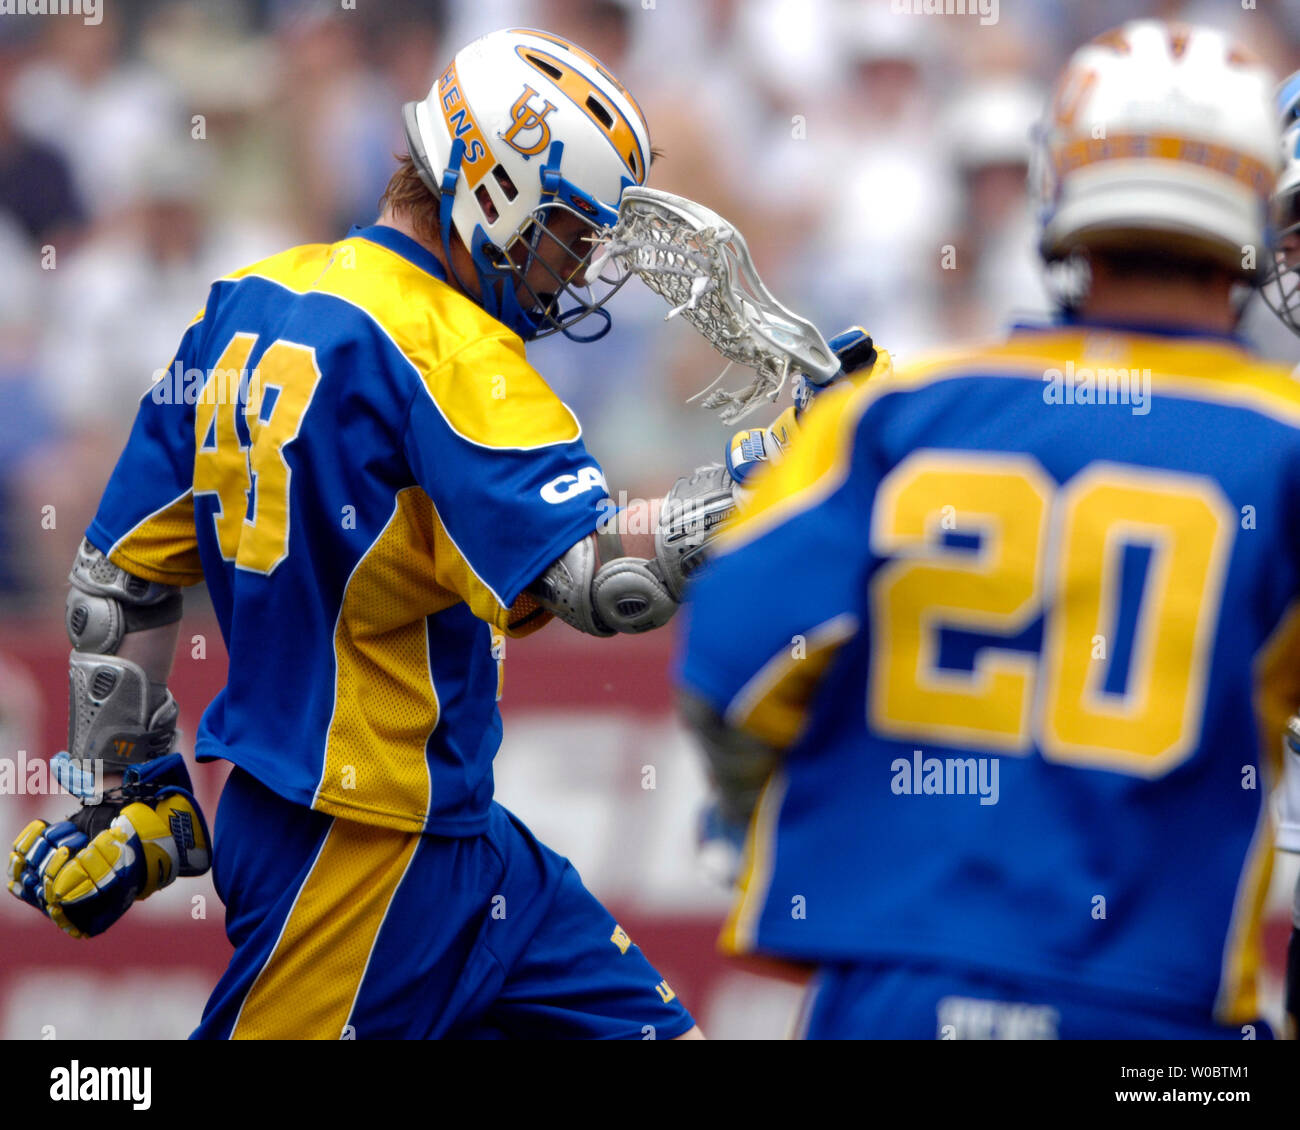 Delaware Blue Hens Curtis Dickson (48) celebrates his goal in the second quarter against the Johns Hopkins University Blue Jays in the semi-final of the NCAA Division I lacrosse championship at M&T Bank Stadium in Baltimore, Maryland on May 26, 2007.  (UPI Photo/ Mark Goldman) Stock Photo